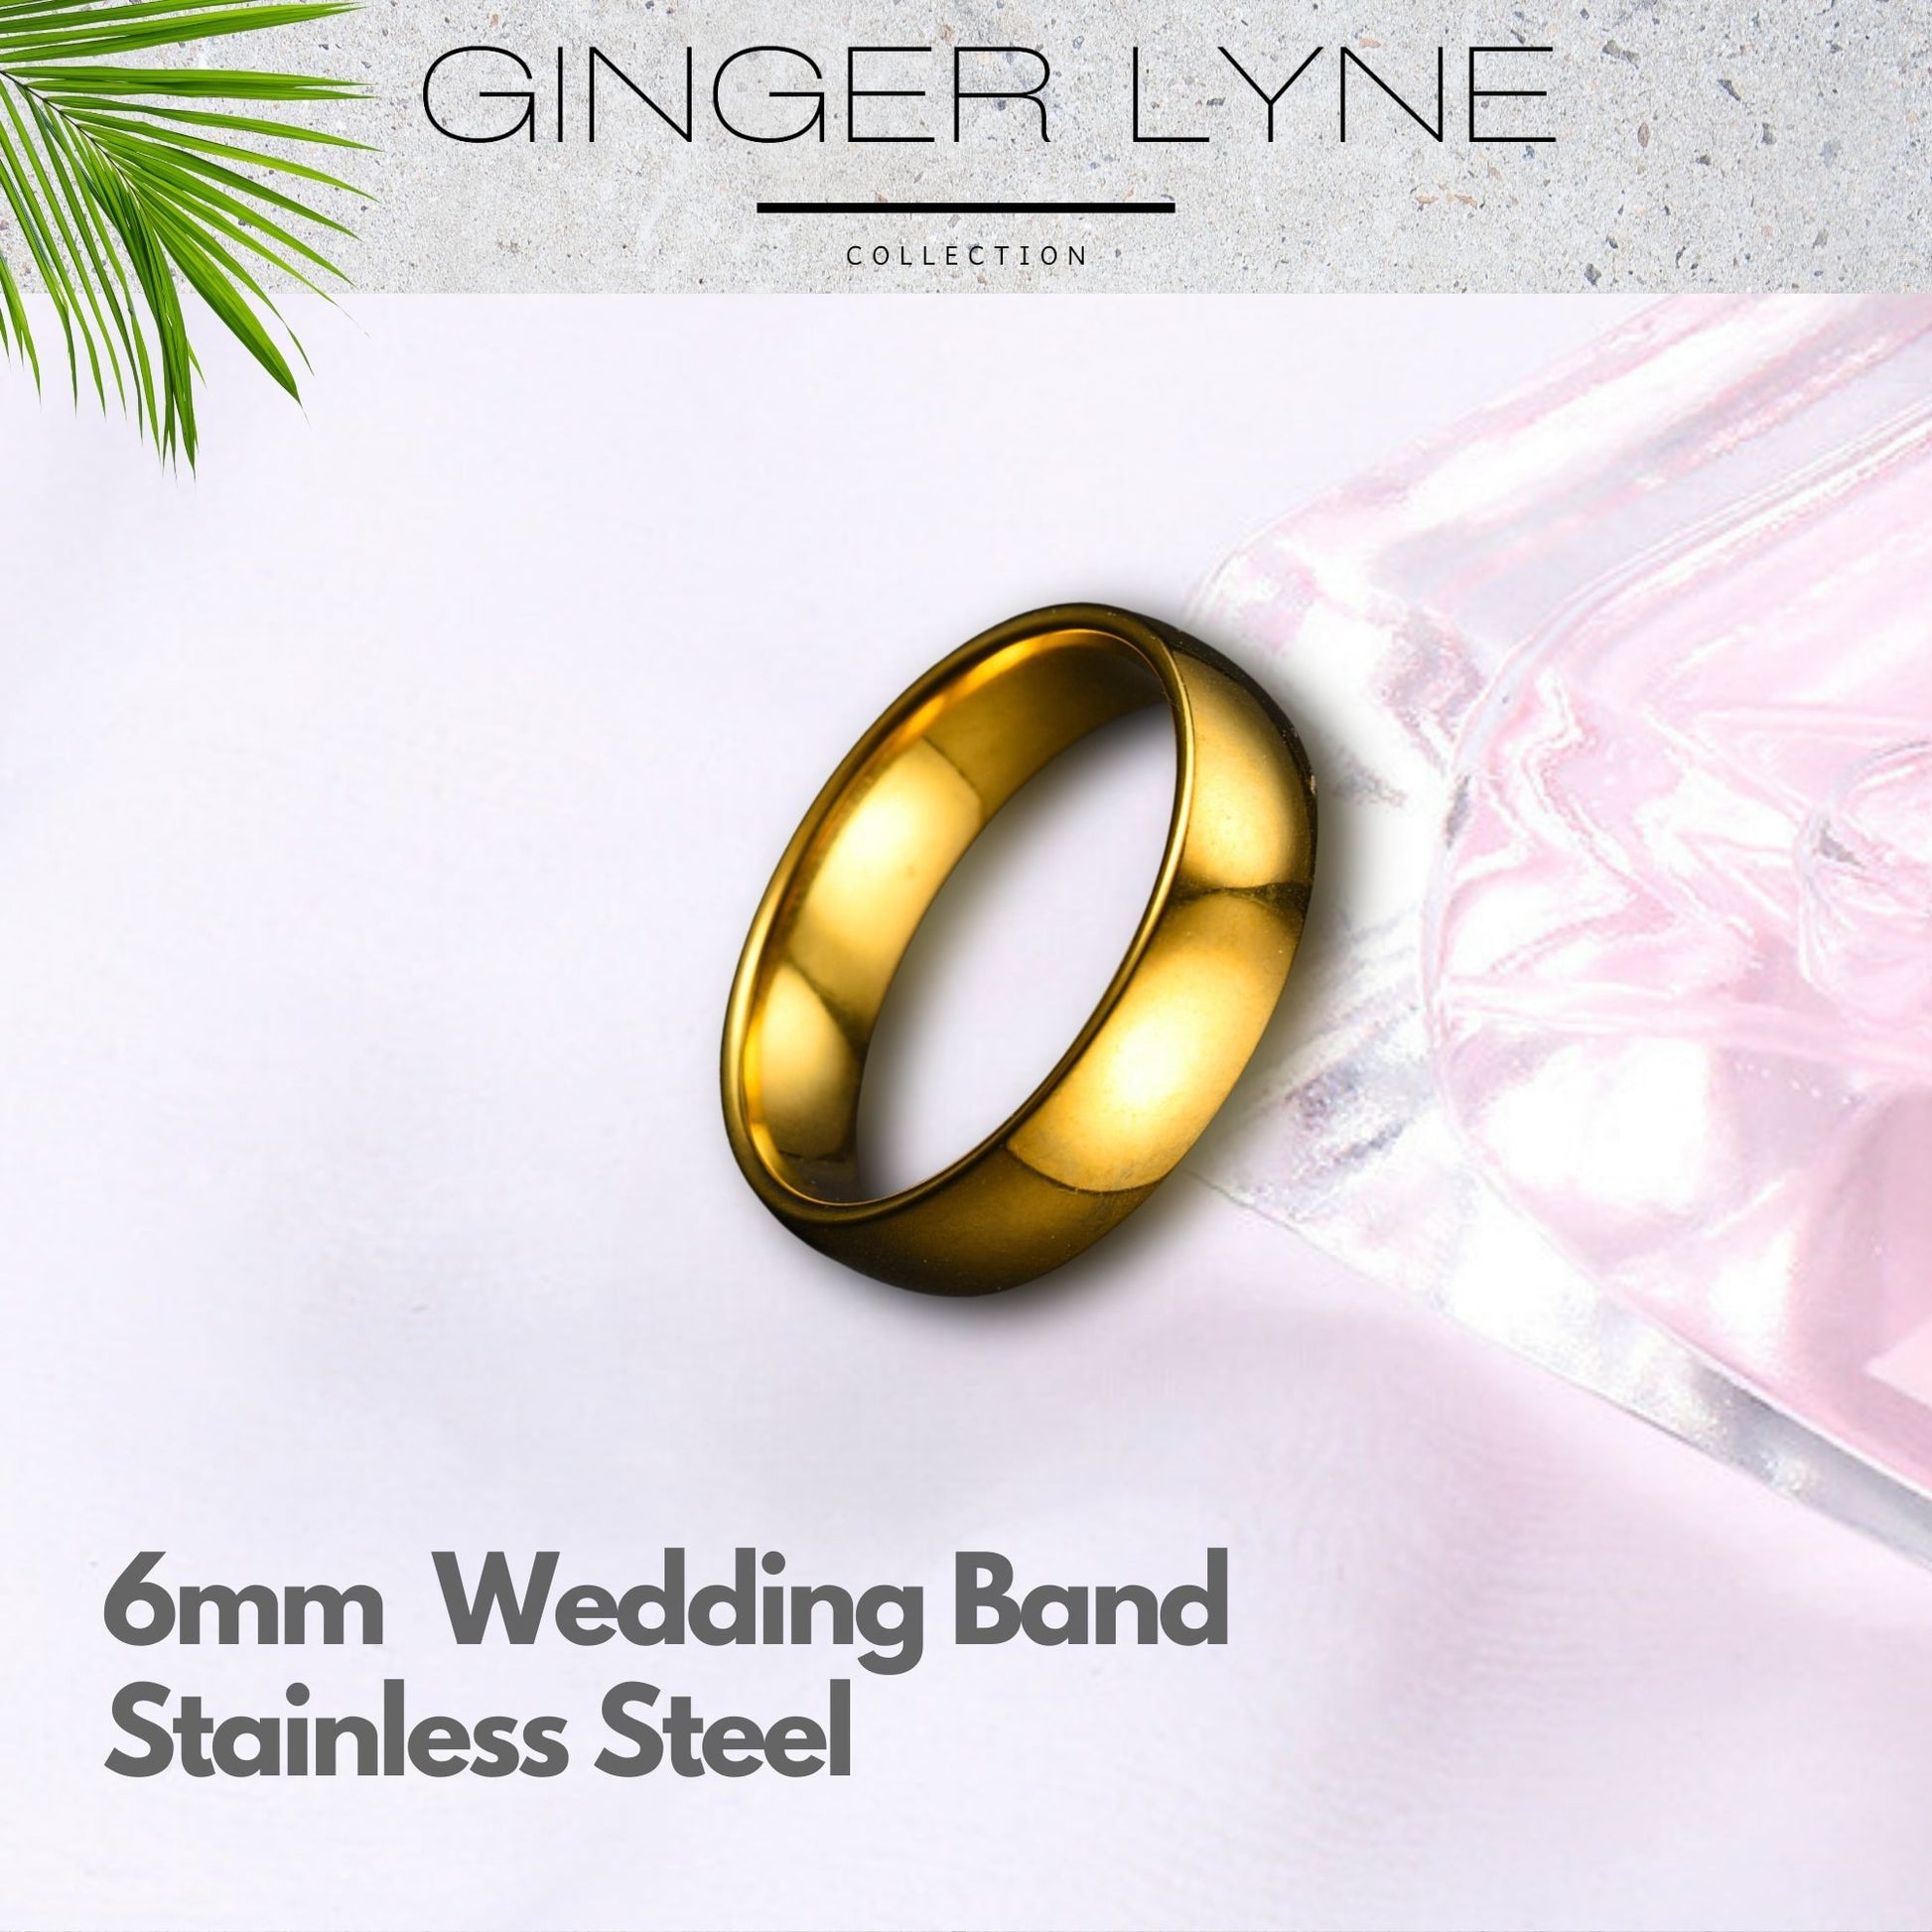 6mm Wedding Band Women Mens Gold Stainless Steel Ring by Ginger Lyne Collection - 6mm Gold,7